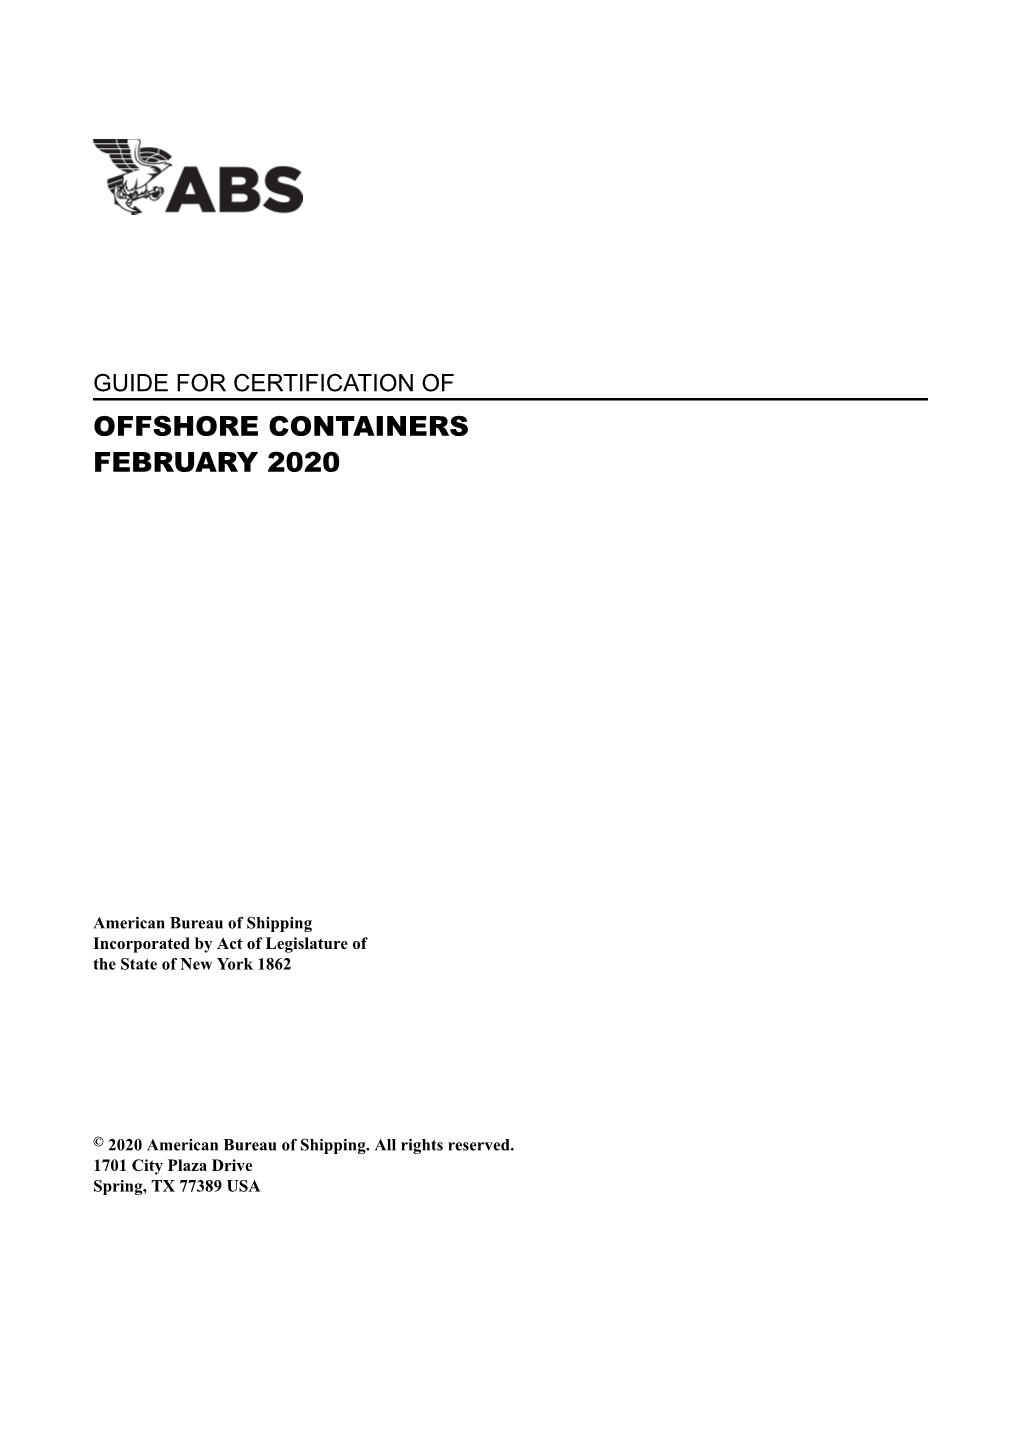 Guide for Certification of Offshore Containers 2020